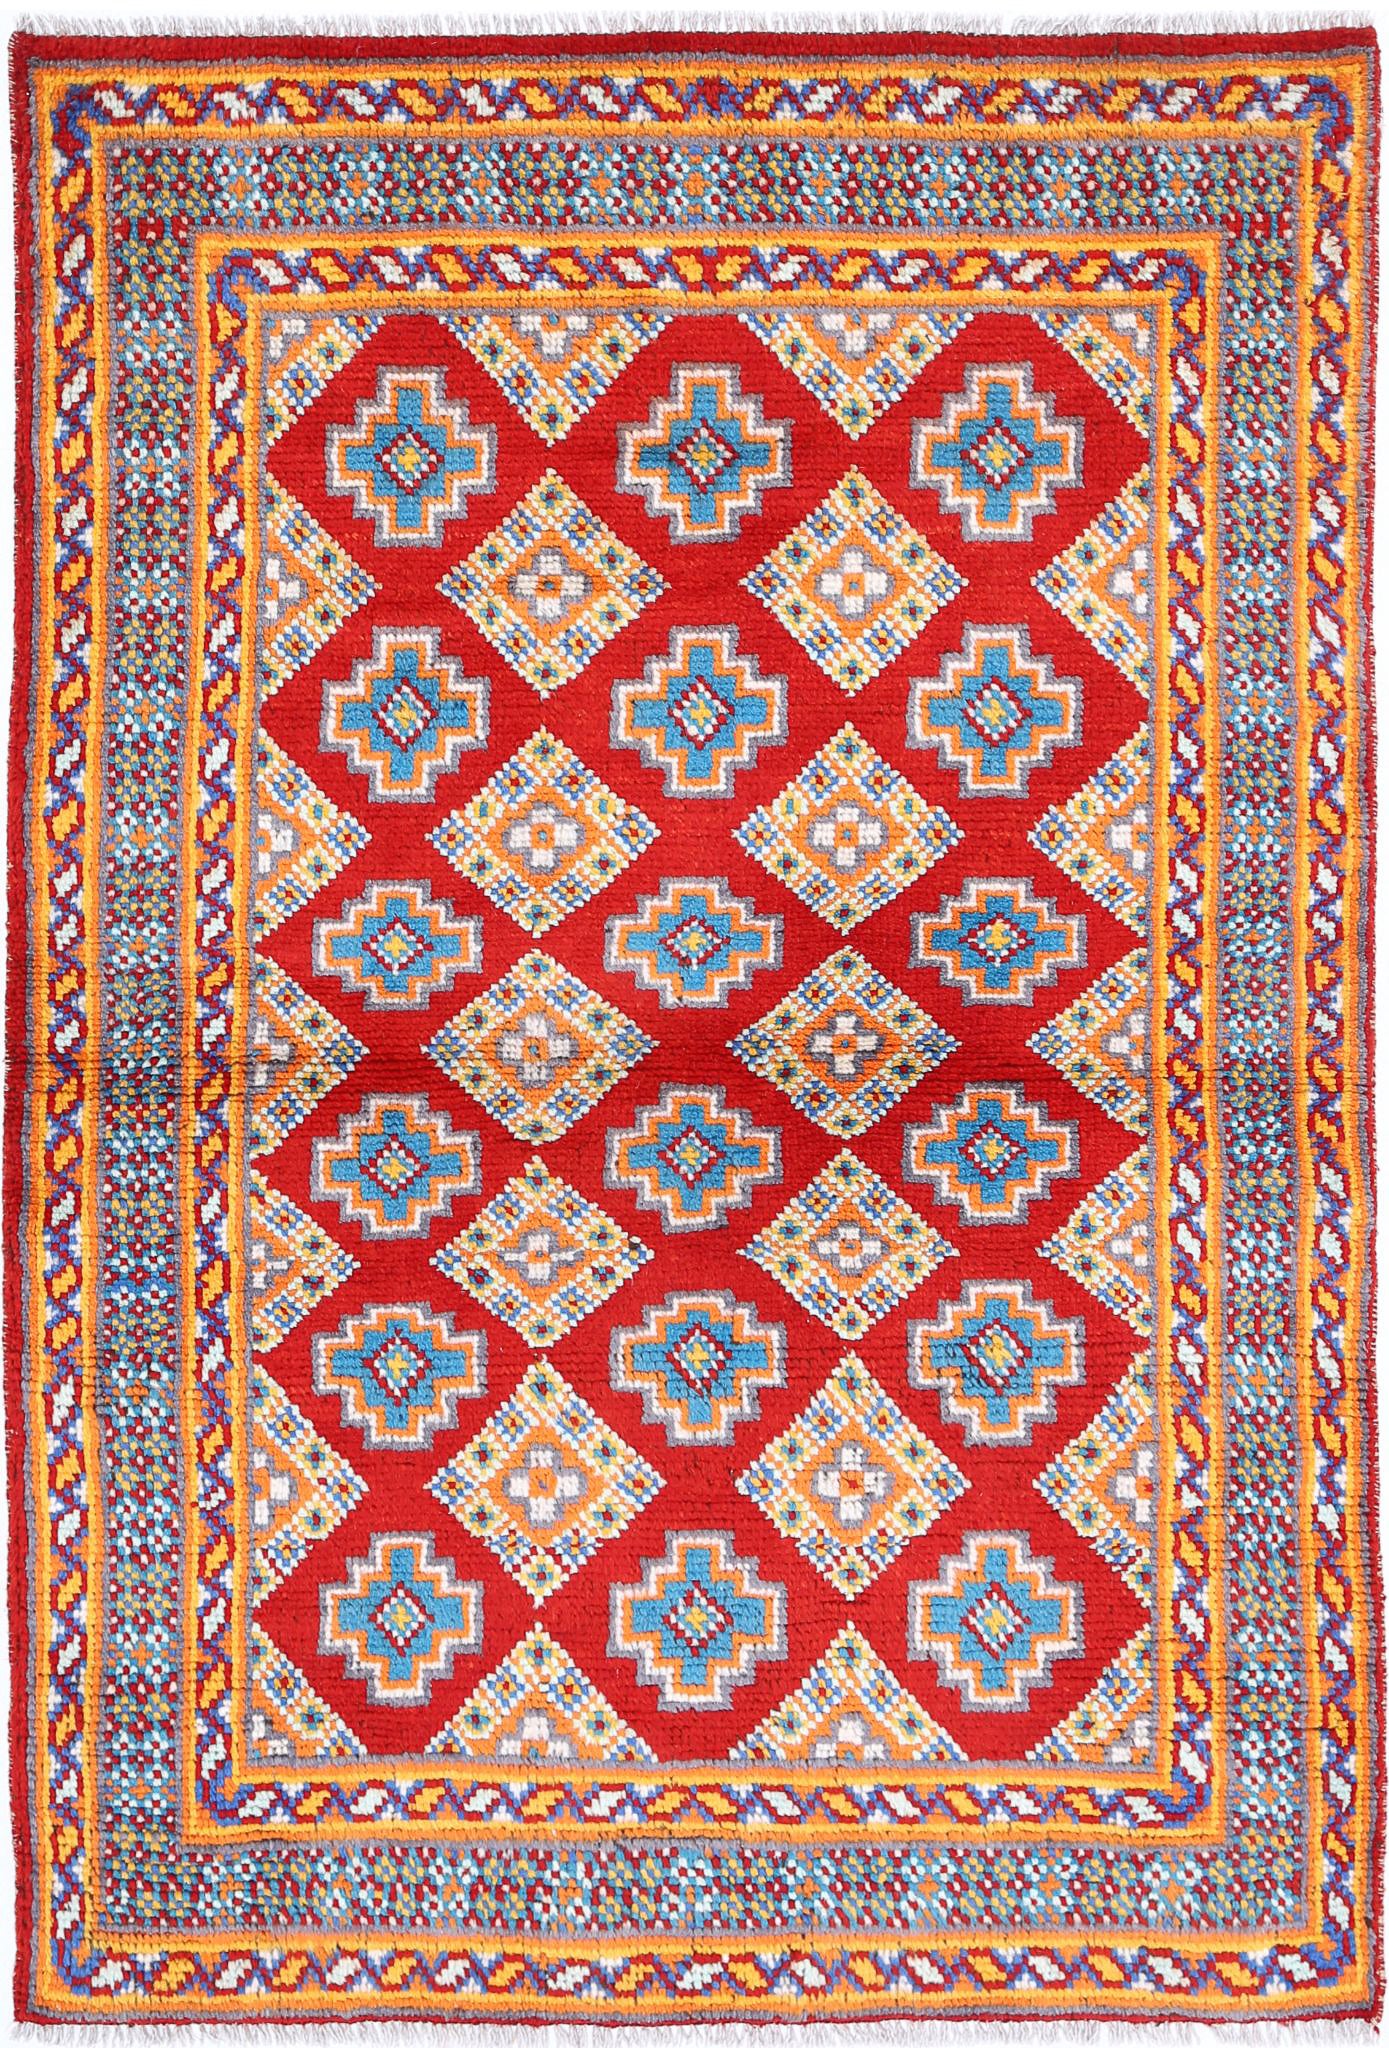 Revival-hand-knotted-qarghani-wool-rug-5014045.jpg